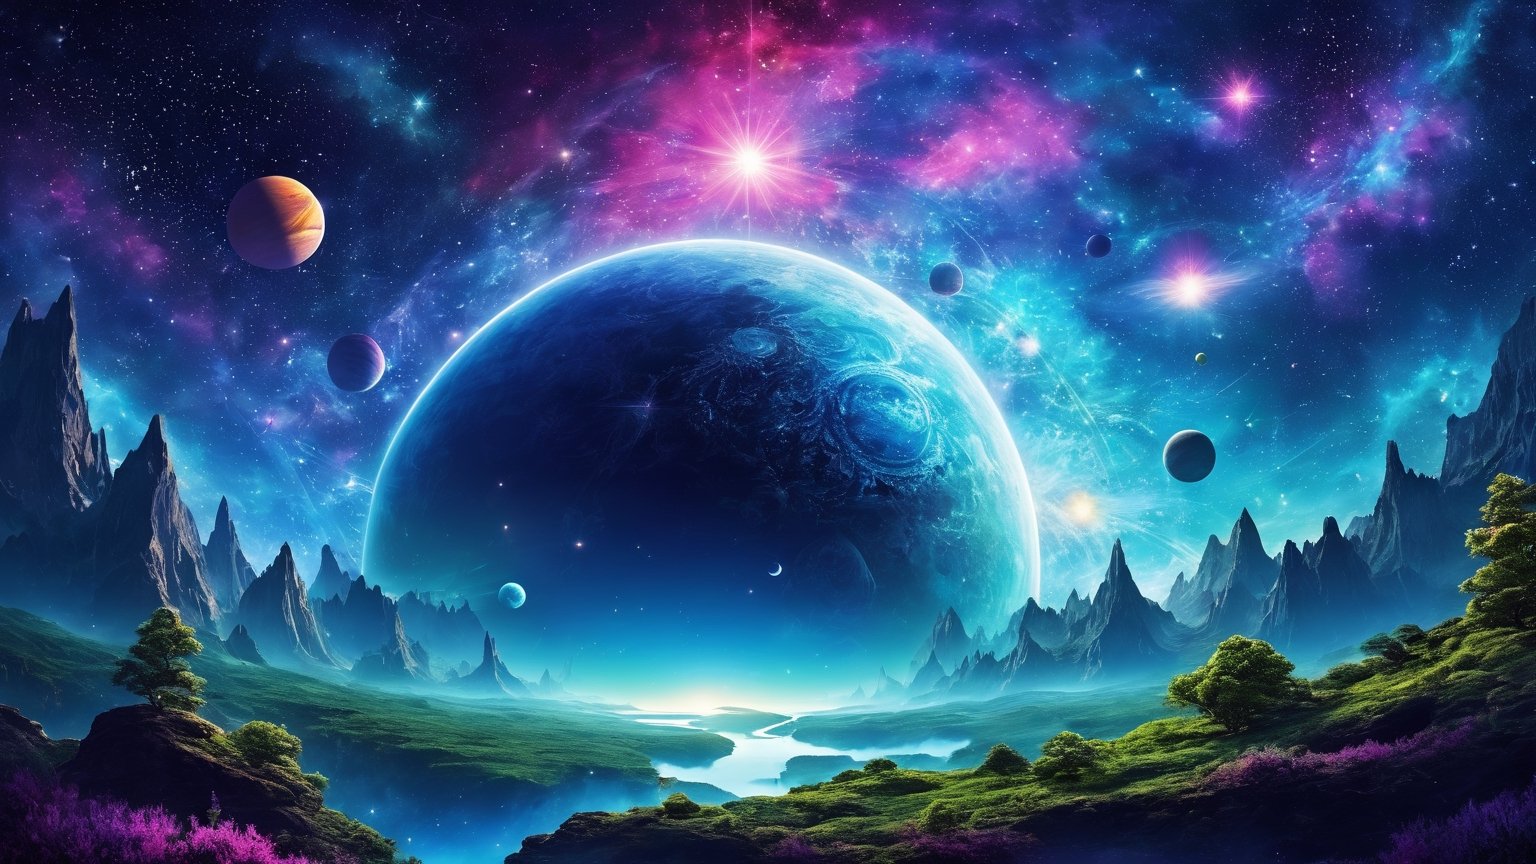 plantets, mystical and magical planets, magical nebula, astral projection